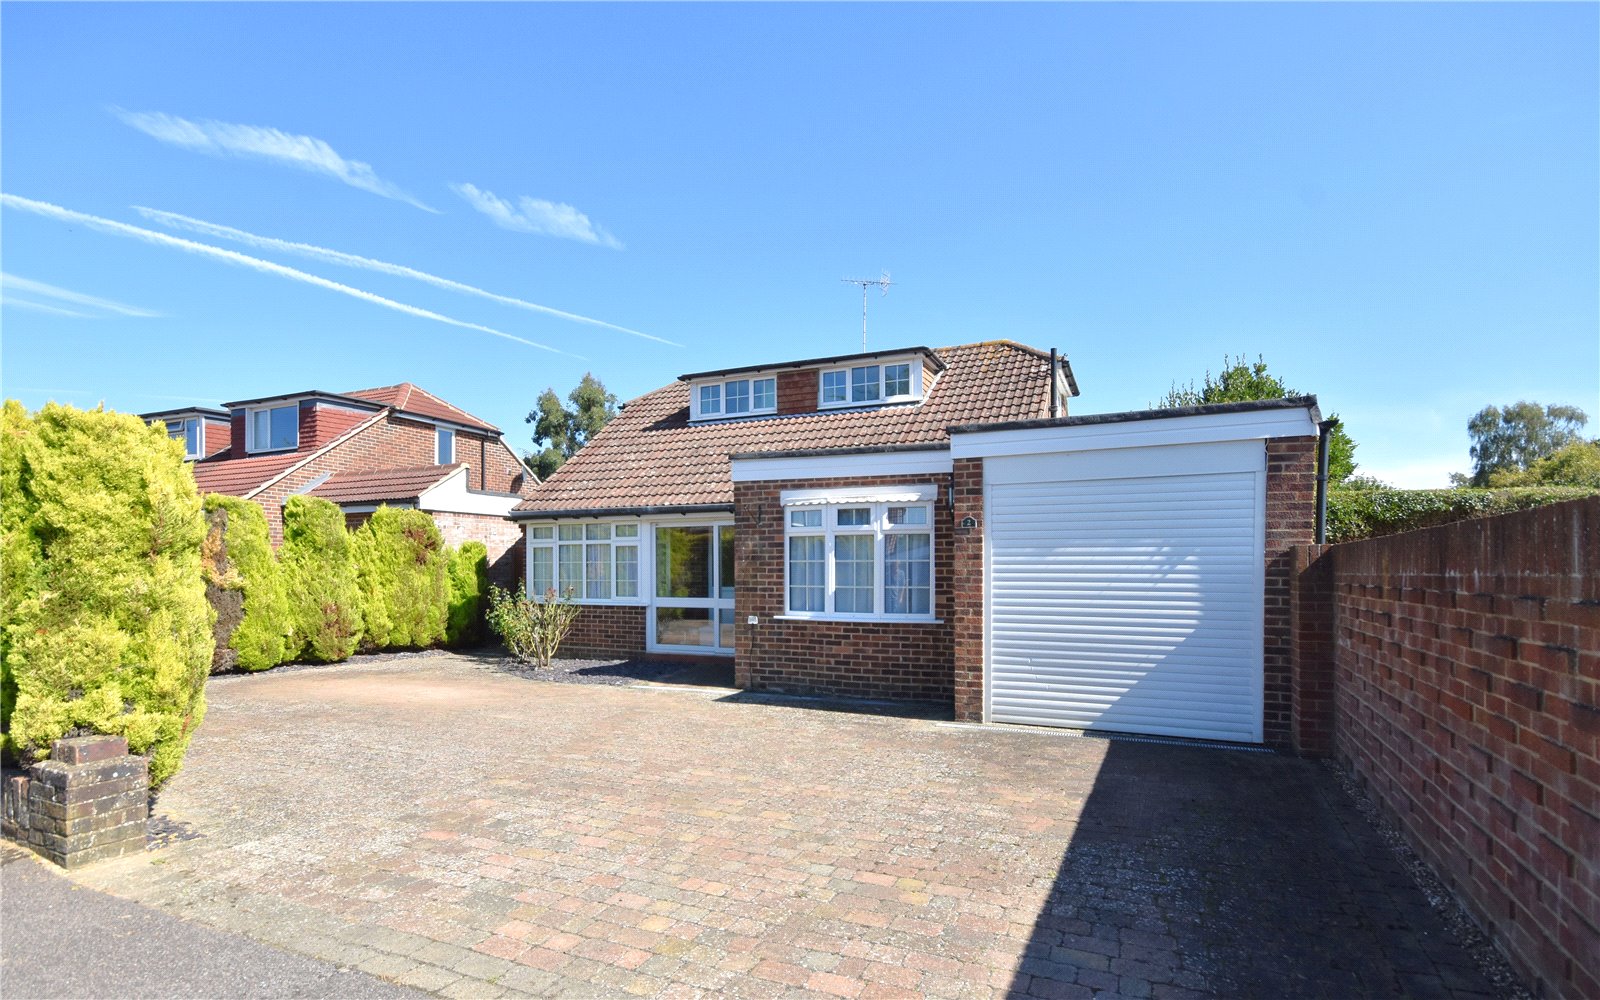 Bolters Road South, Horley, RH6